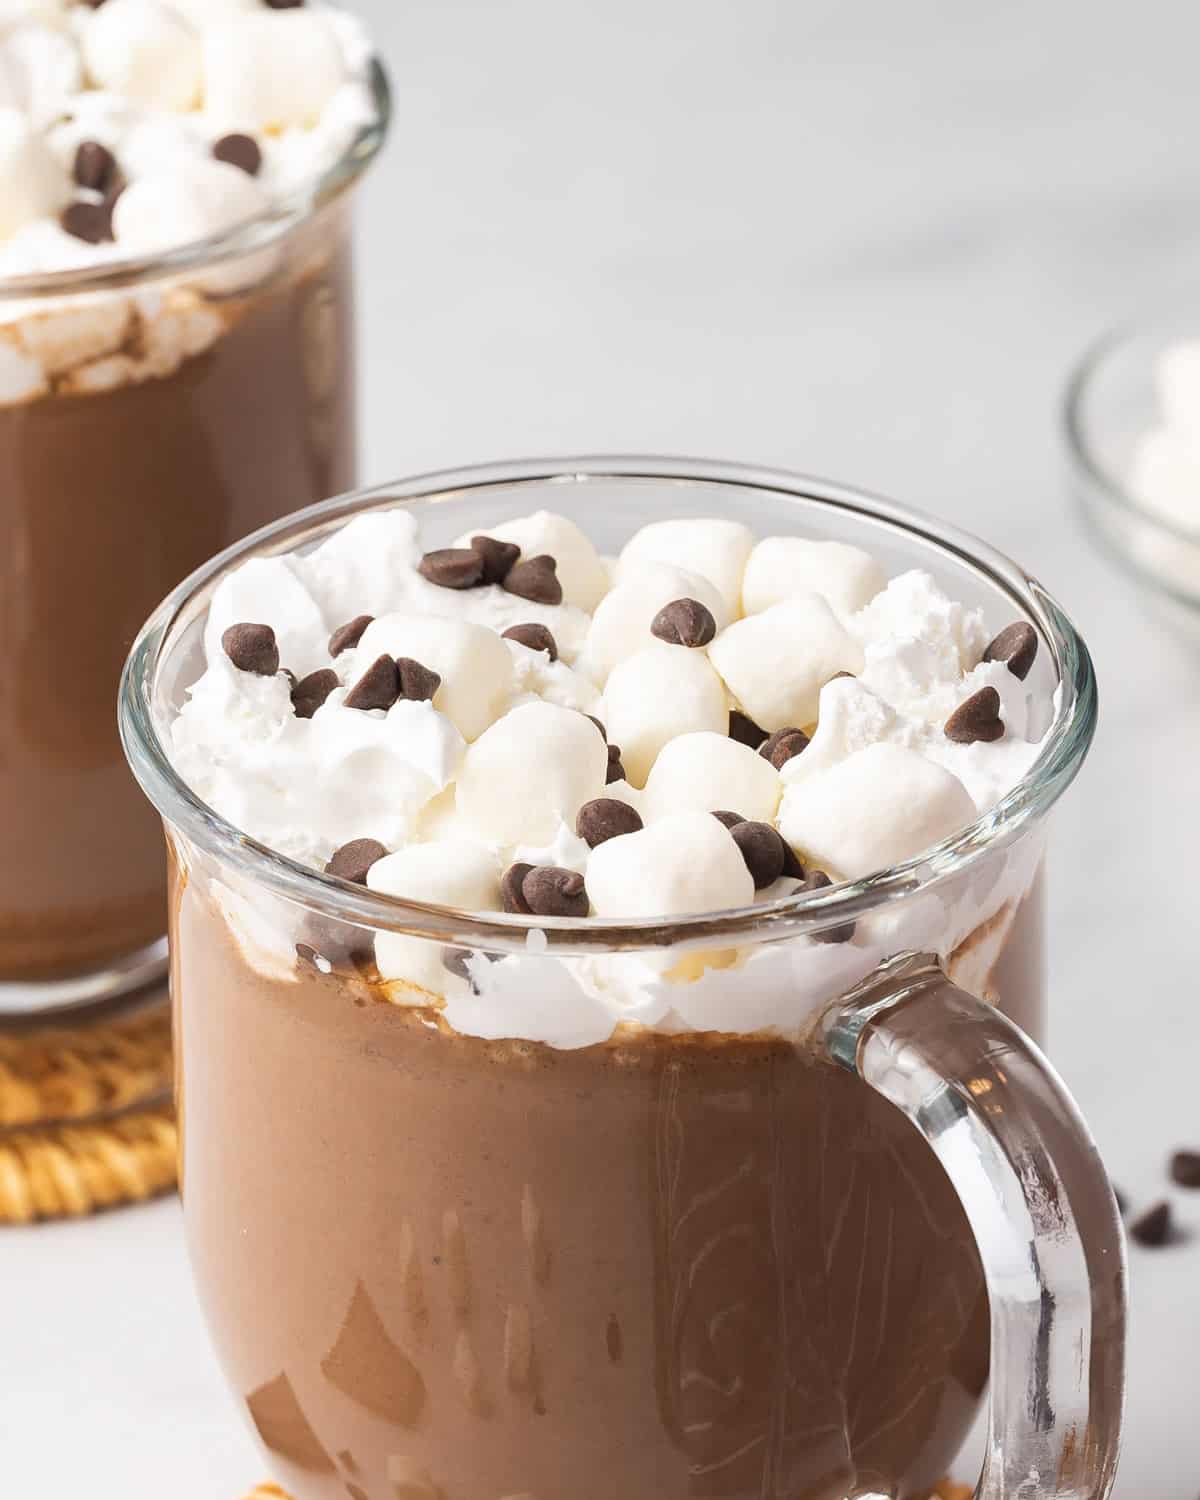 A glass mug of crockpot hot chocolate with whipped cream, mini marshmallows, and chocolate chips.